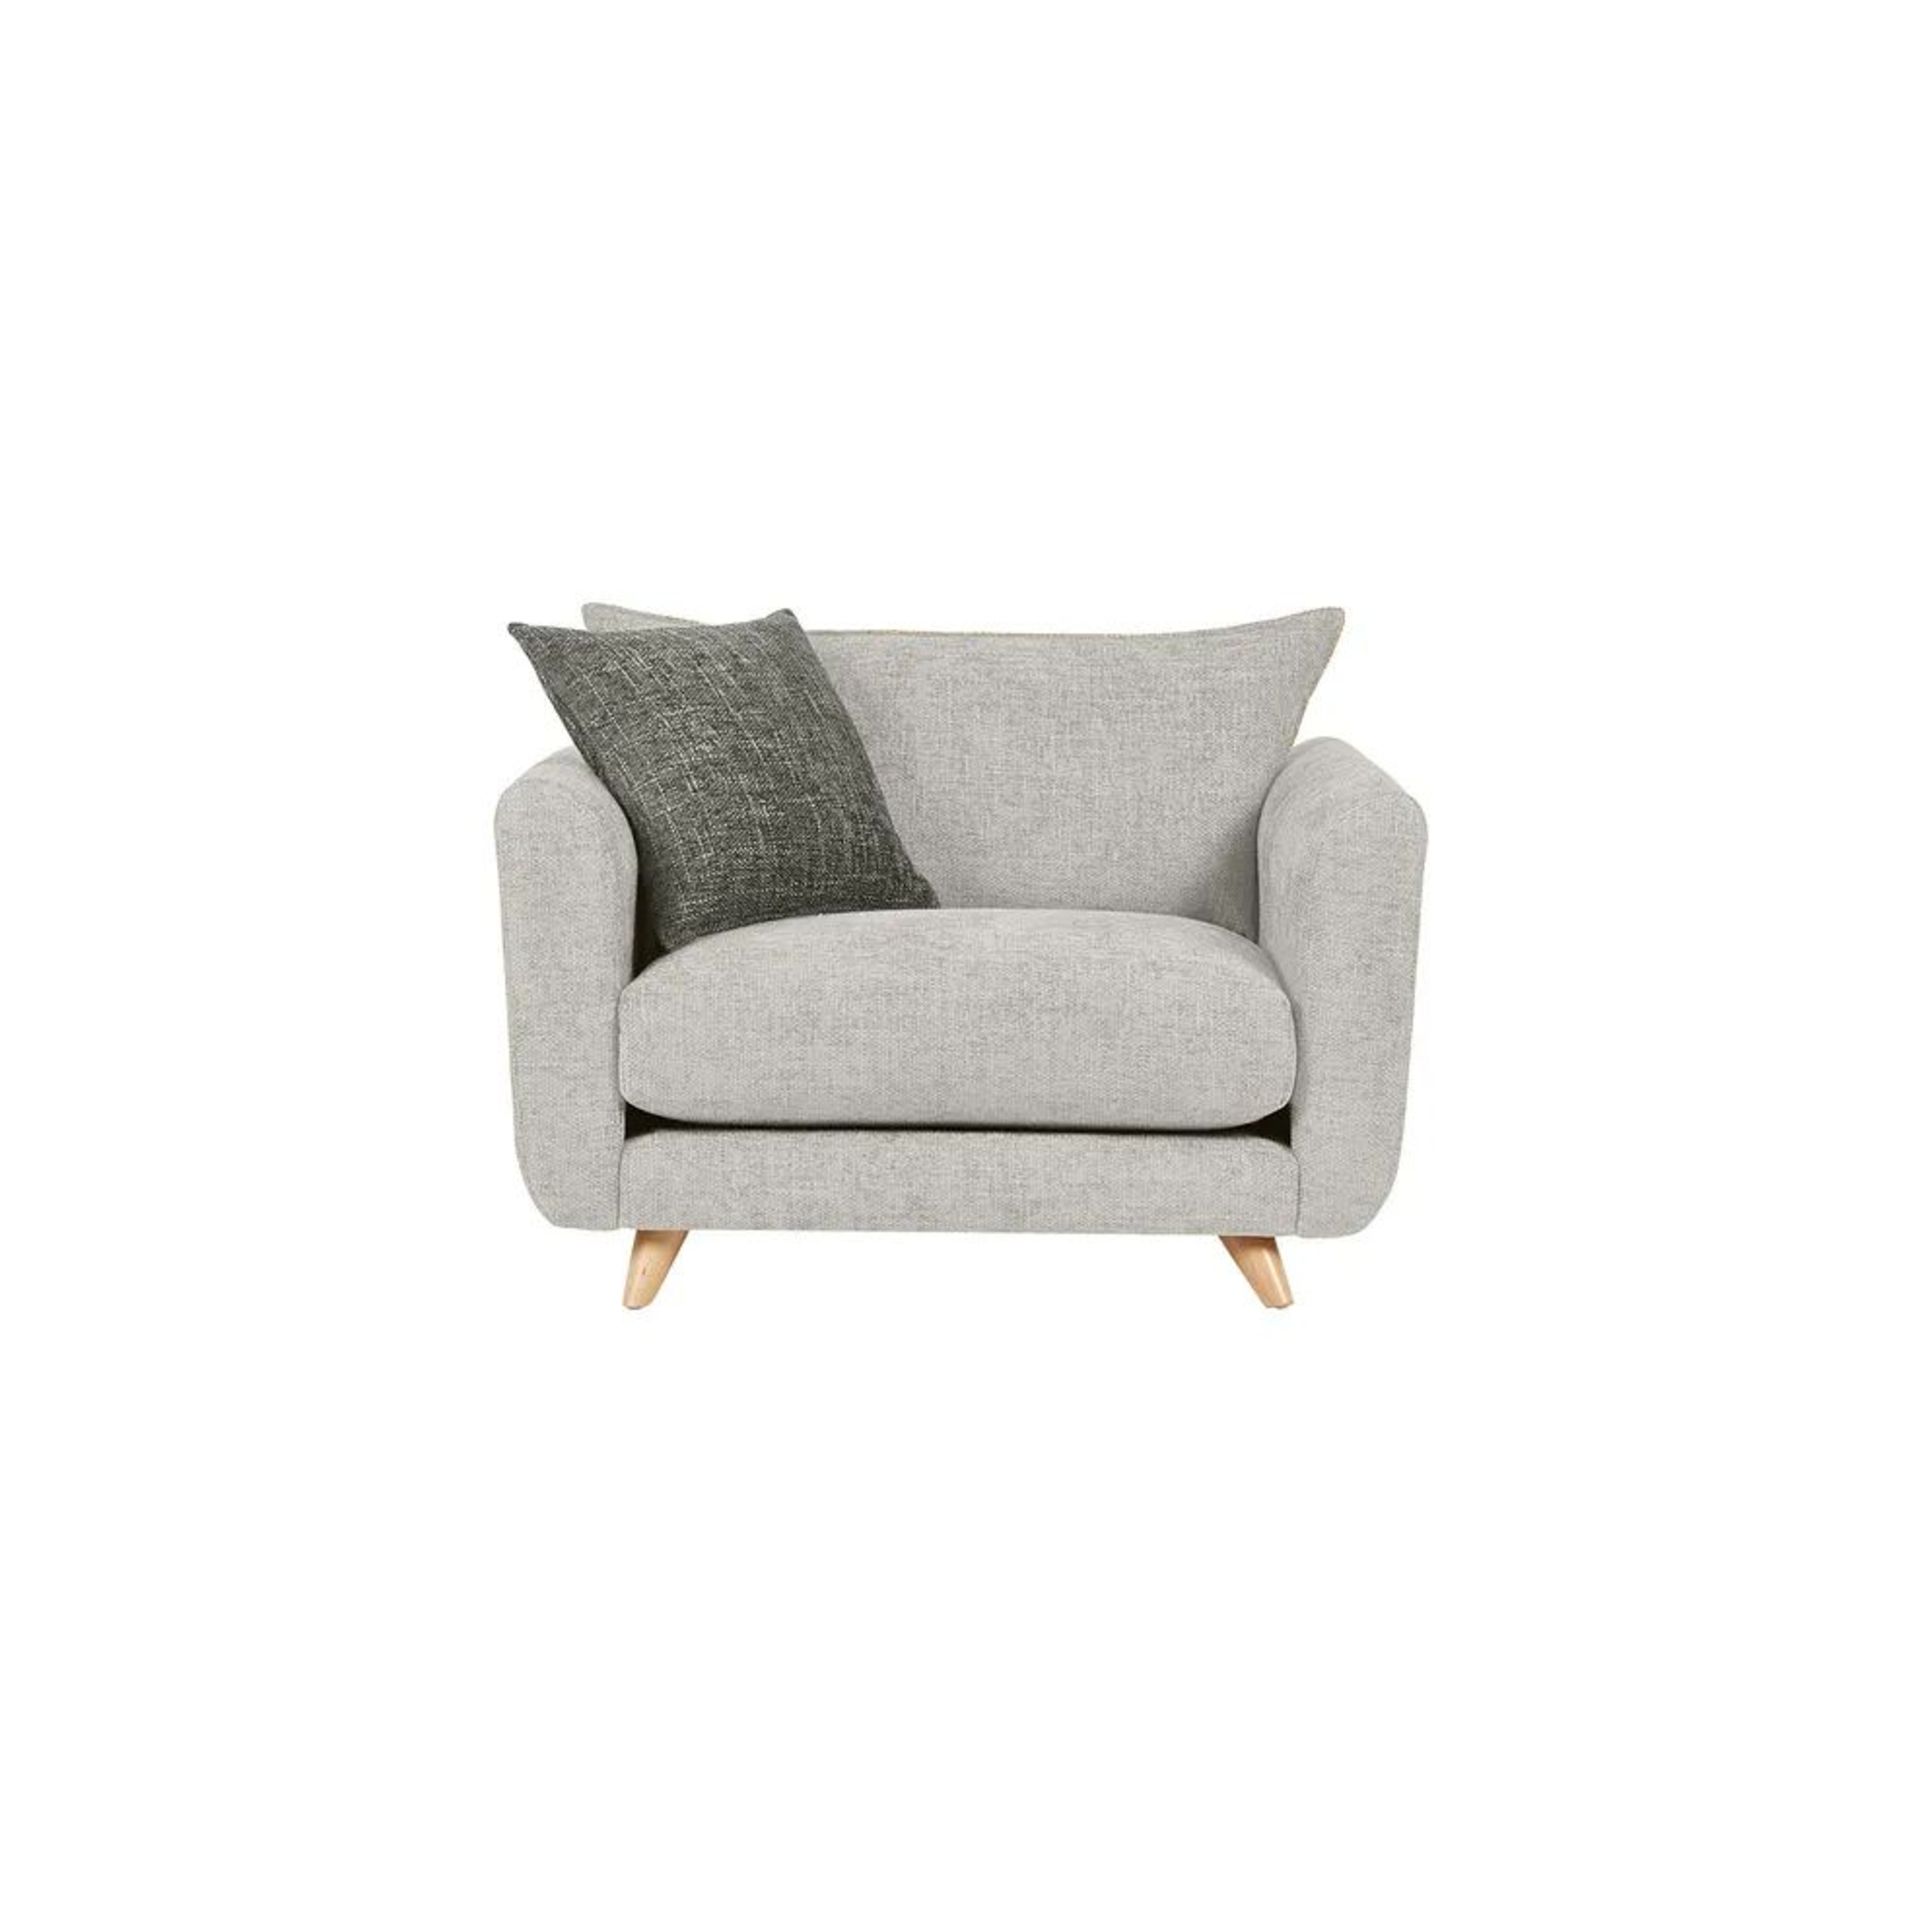 BRAND NEW DALBY High Back Loveseat - SILVER FABRIC. RRP £1149. Our Dalby loveseat, shown here in - Bild 2 aus 6